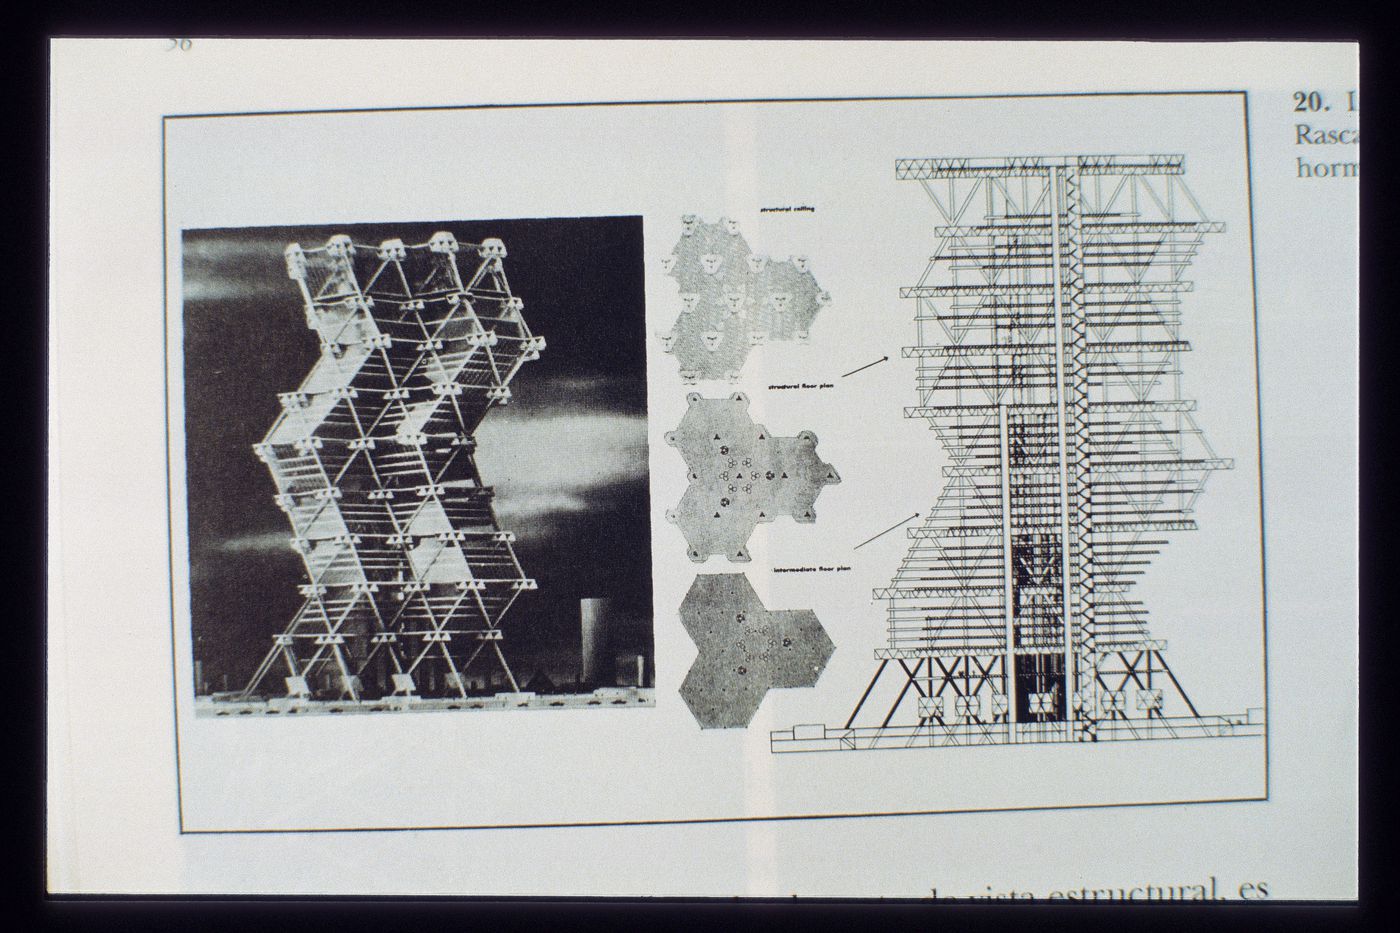 Slide of a drawing for City Tower, Philadelphia, by Louis Kahn and Anne Tyng